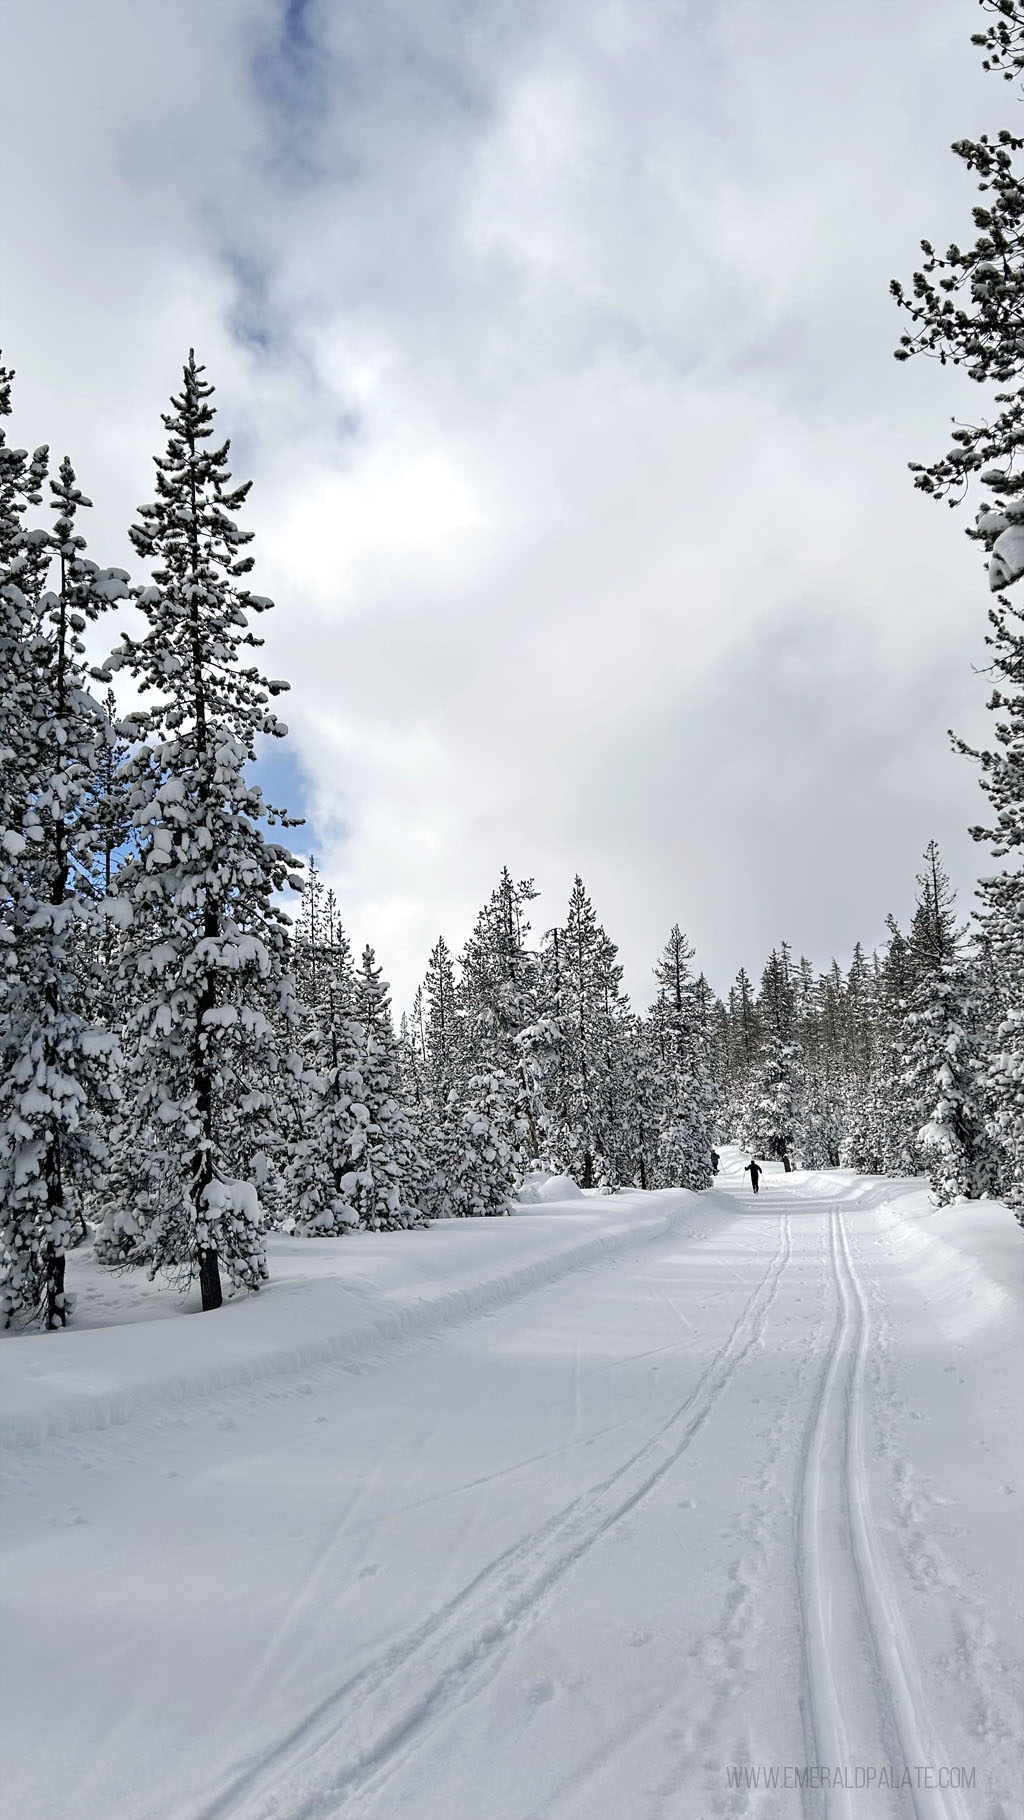 person XC skiing in the distance on a groomed trail, one of the must do things to do in Bend, Oregon in winter